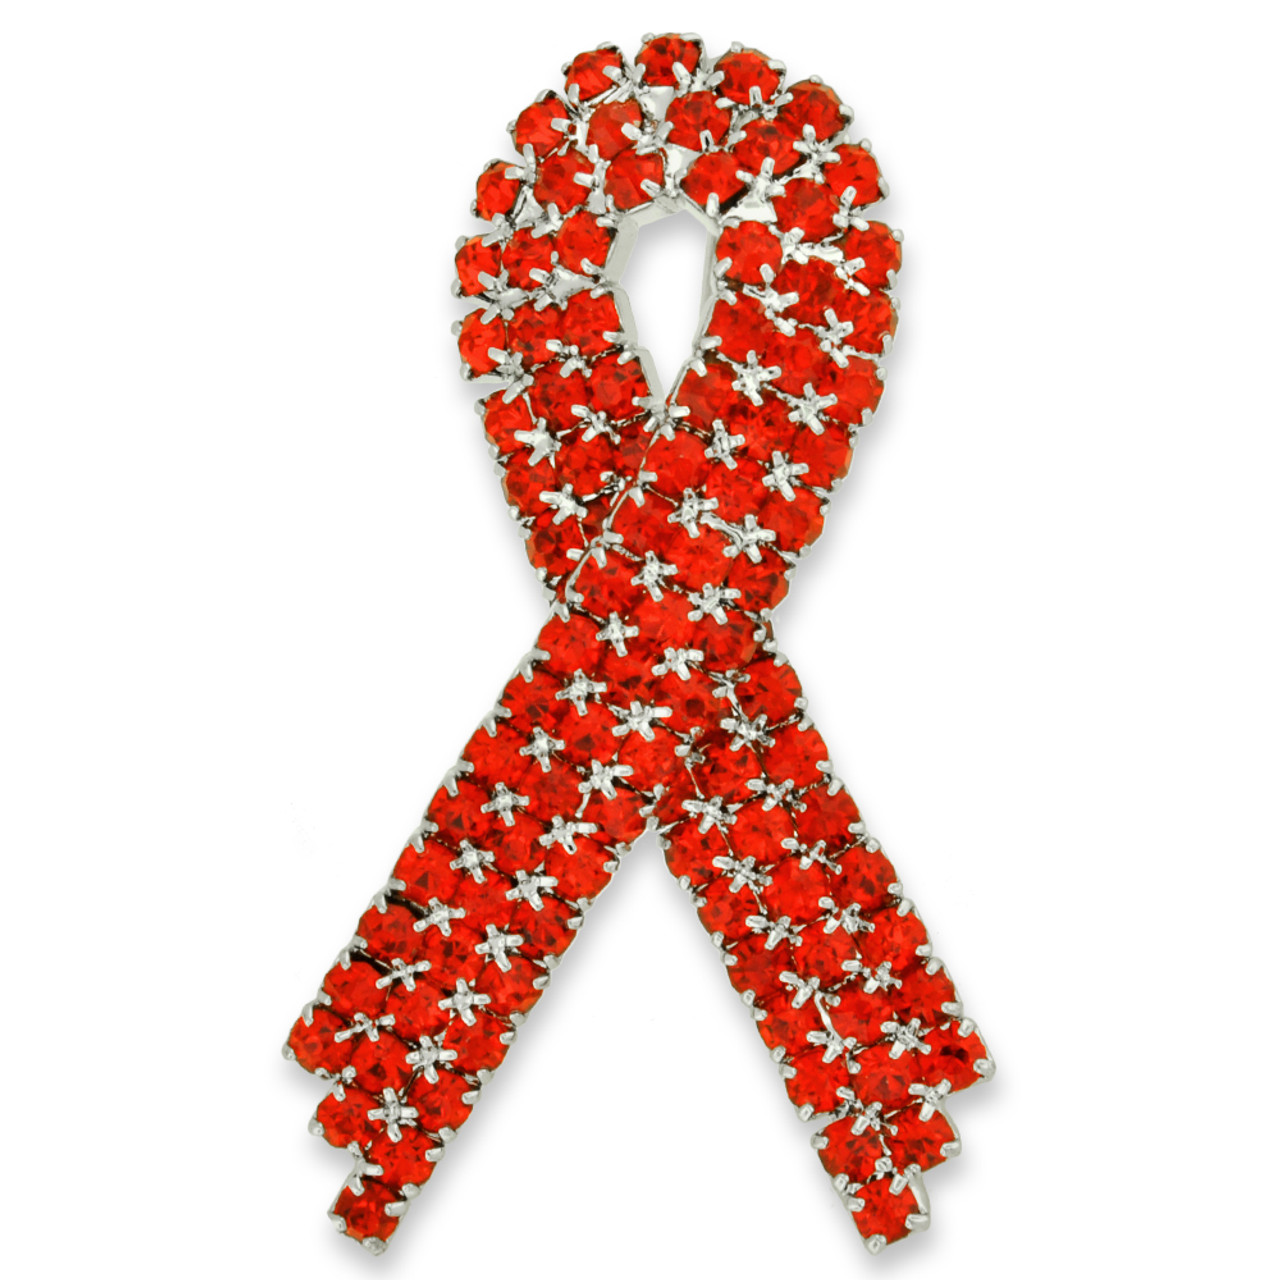 Thin Red Line Awareness Ribbon Pin | Red | First Responder Pins by PinMart